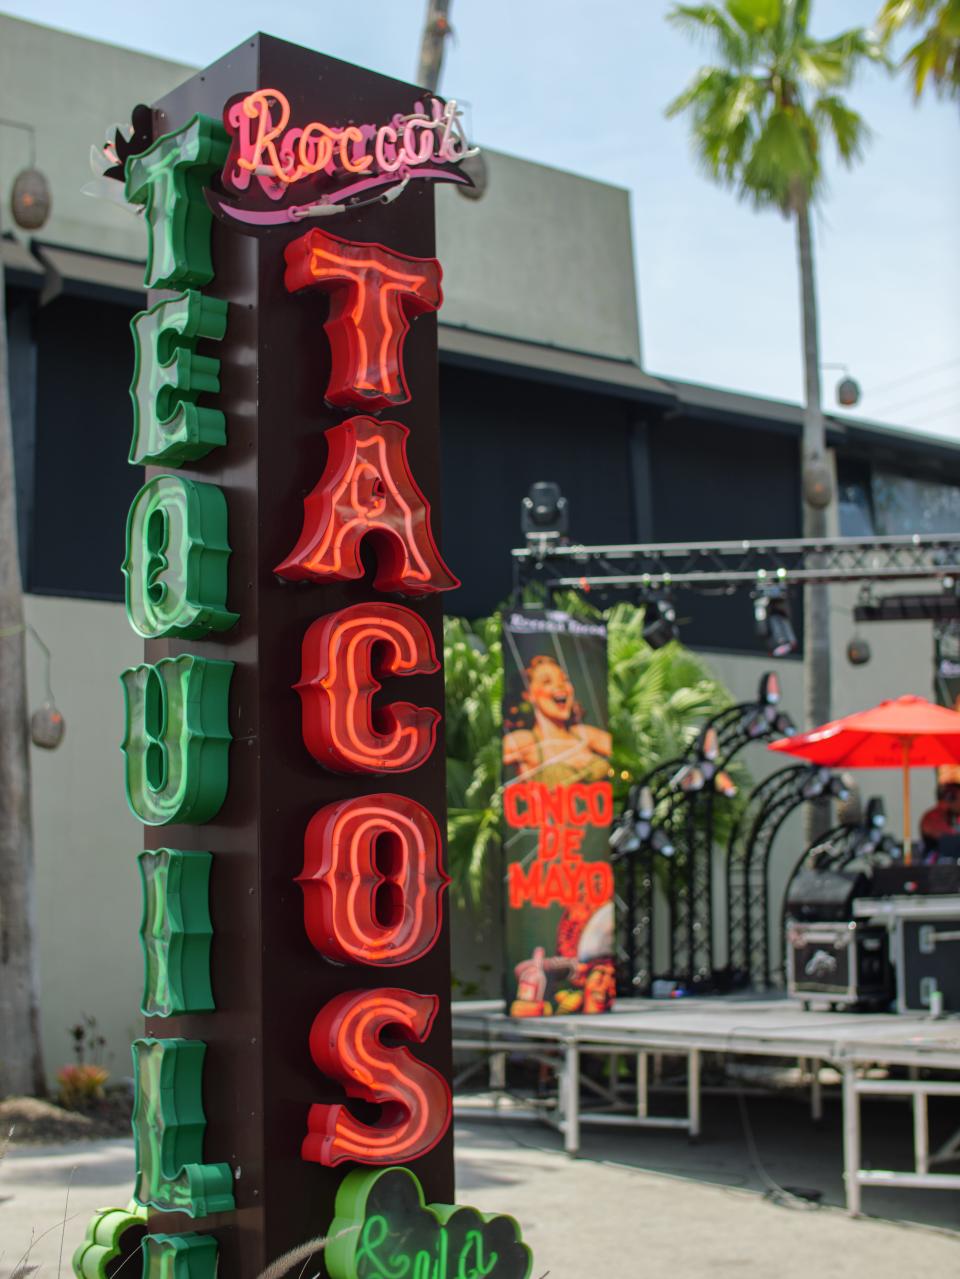 Celebrate Cinco de Mayo at Rocco's Tacos in Palm Beach Gardens, West Palm Beach, Delray Beach or Boca Raton. The Boca location will take it to the next level with a block party.